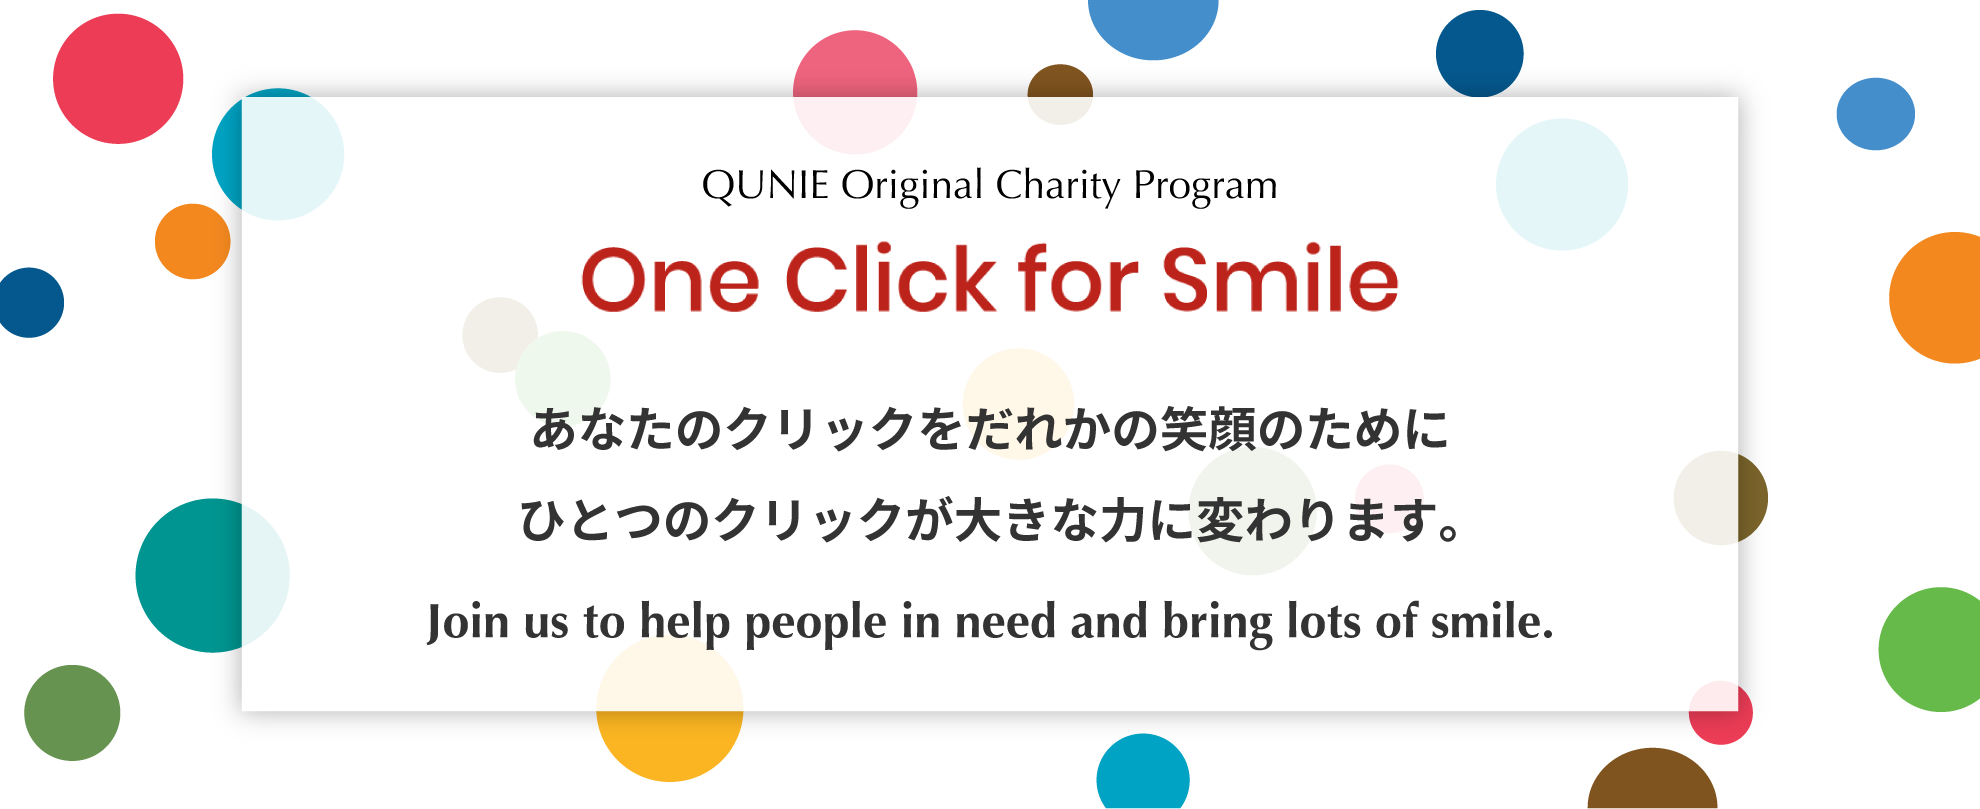 one click for smile